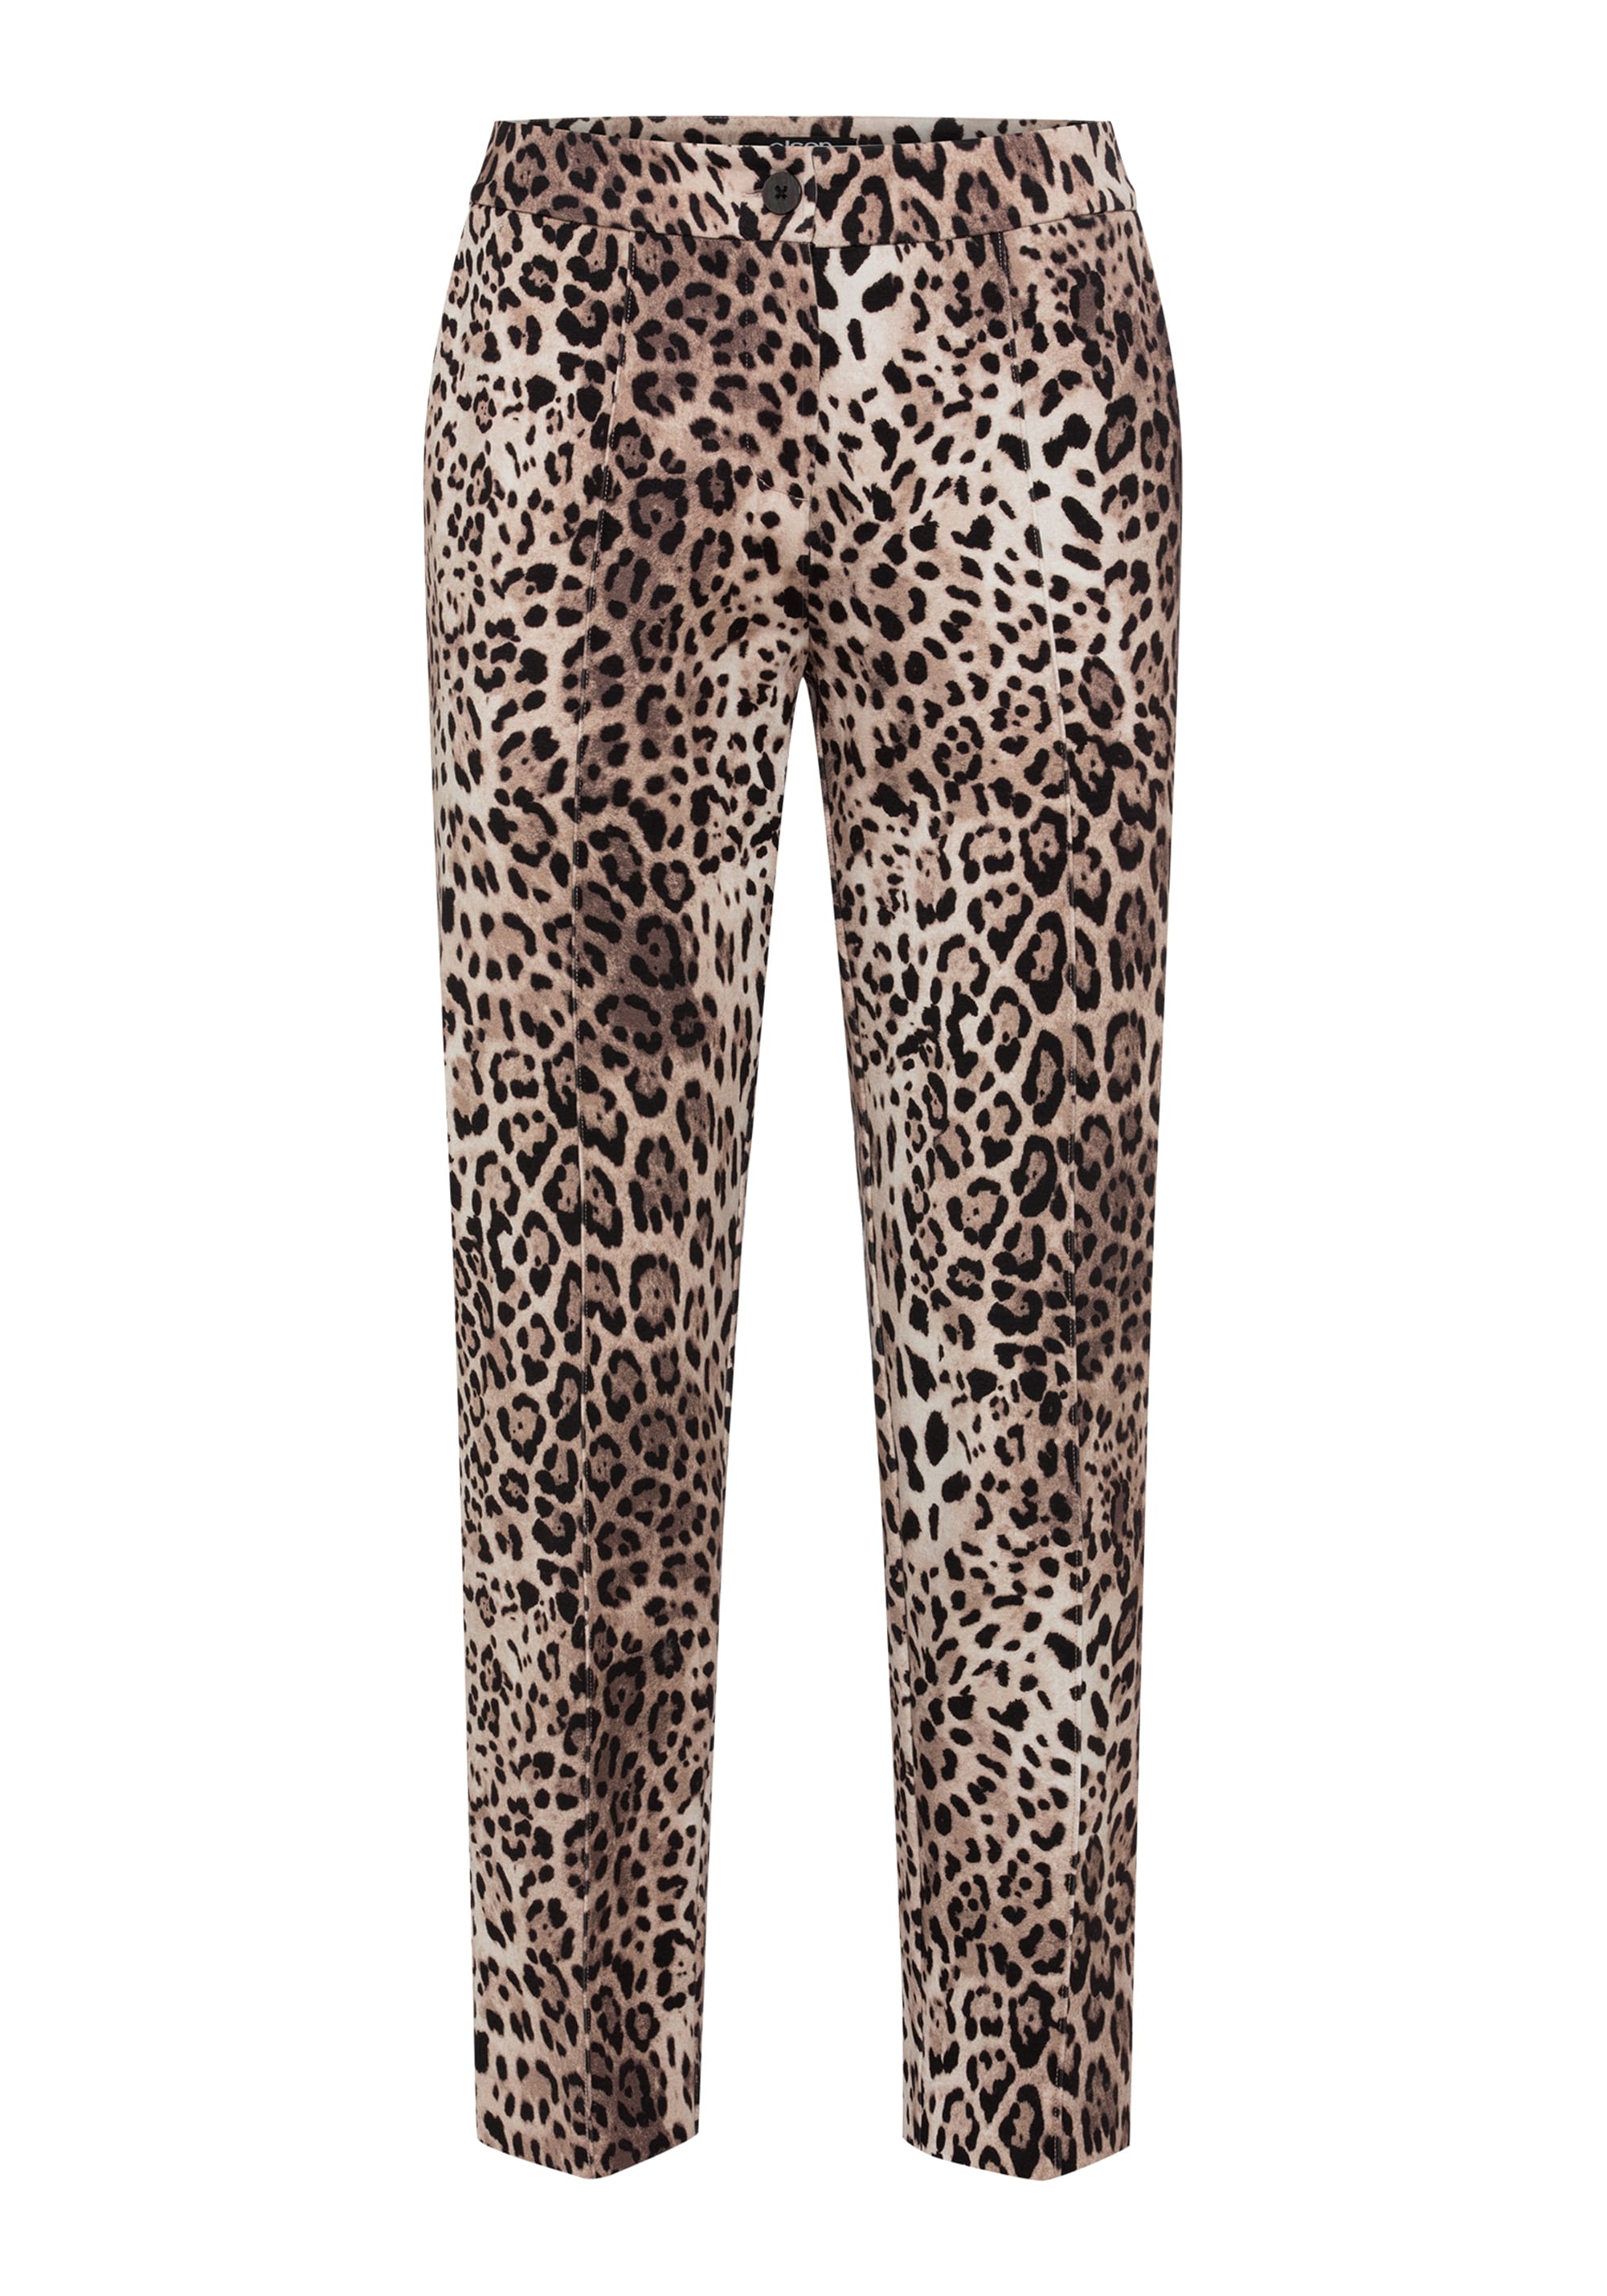 Why Leopard Pants Can Look Good – the Spiff